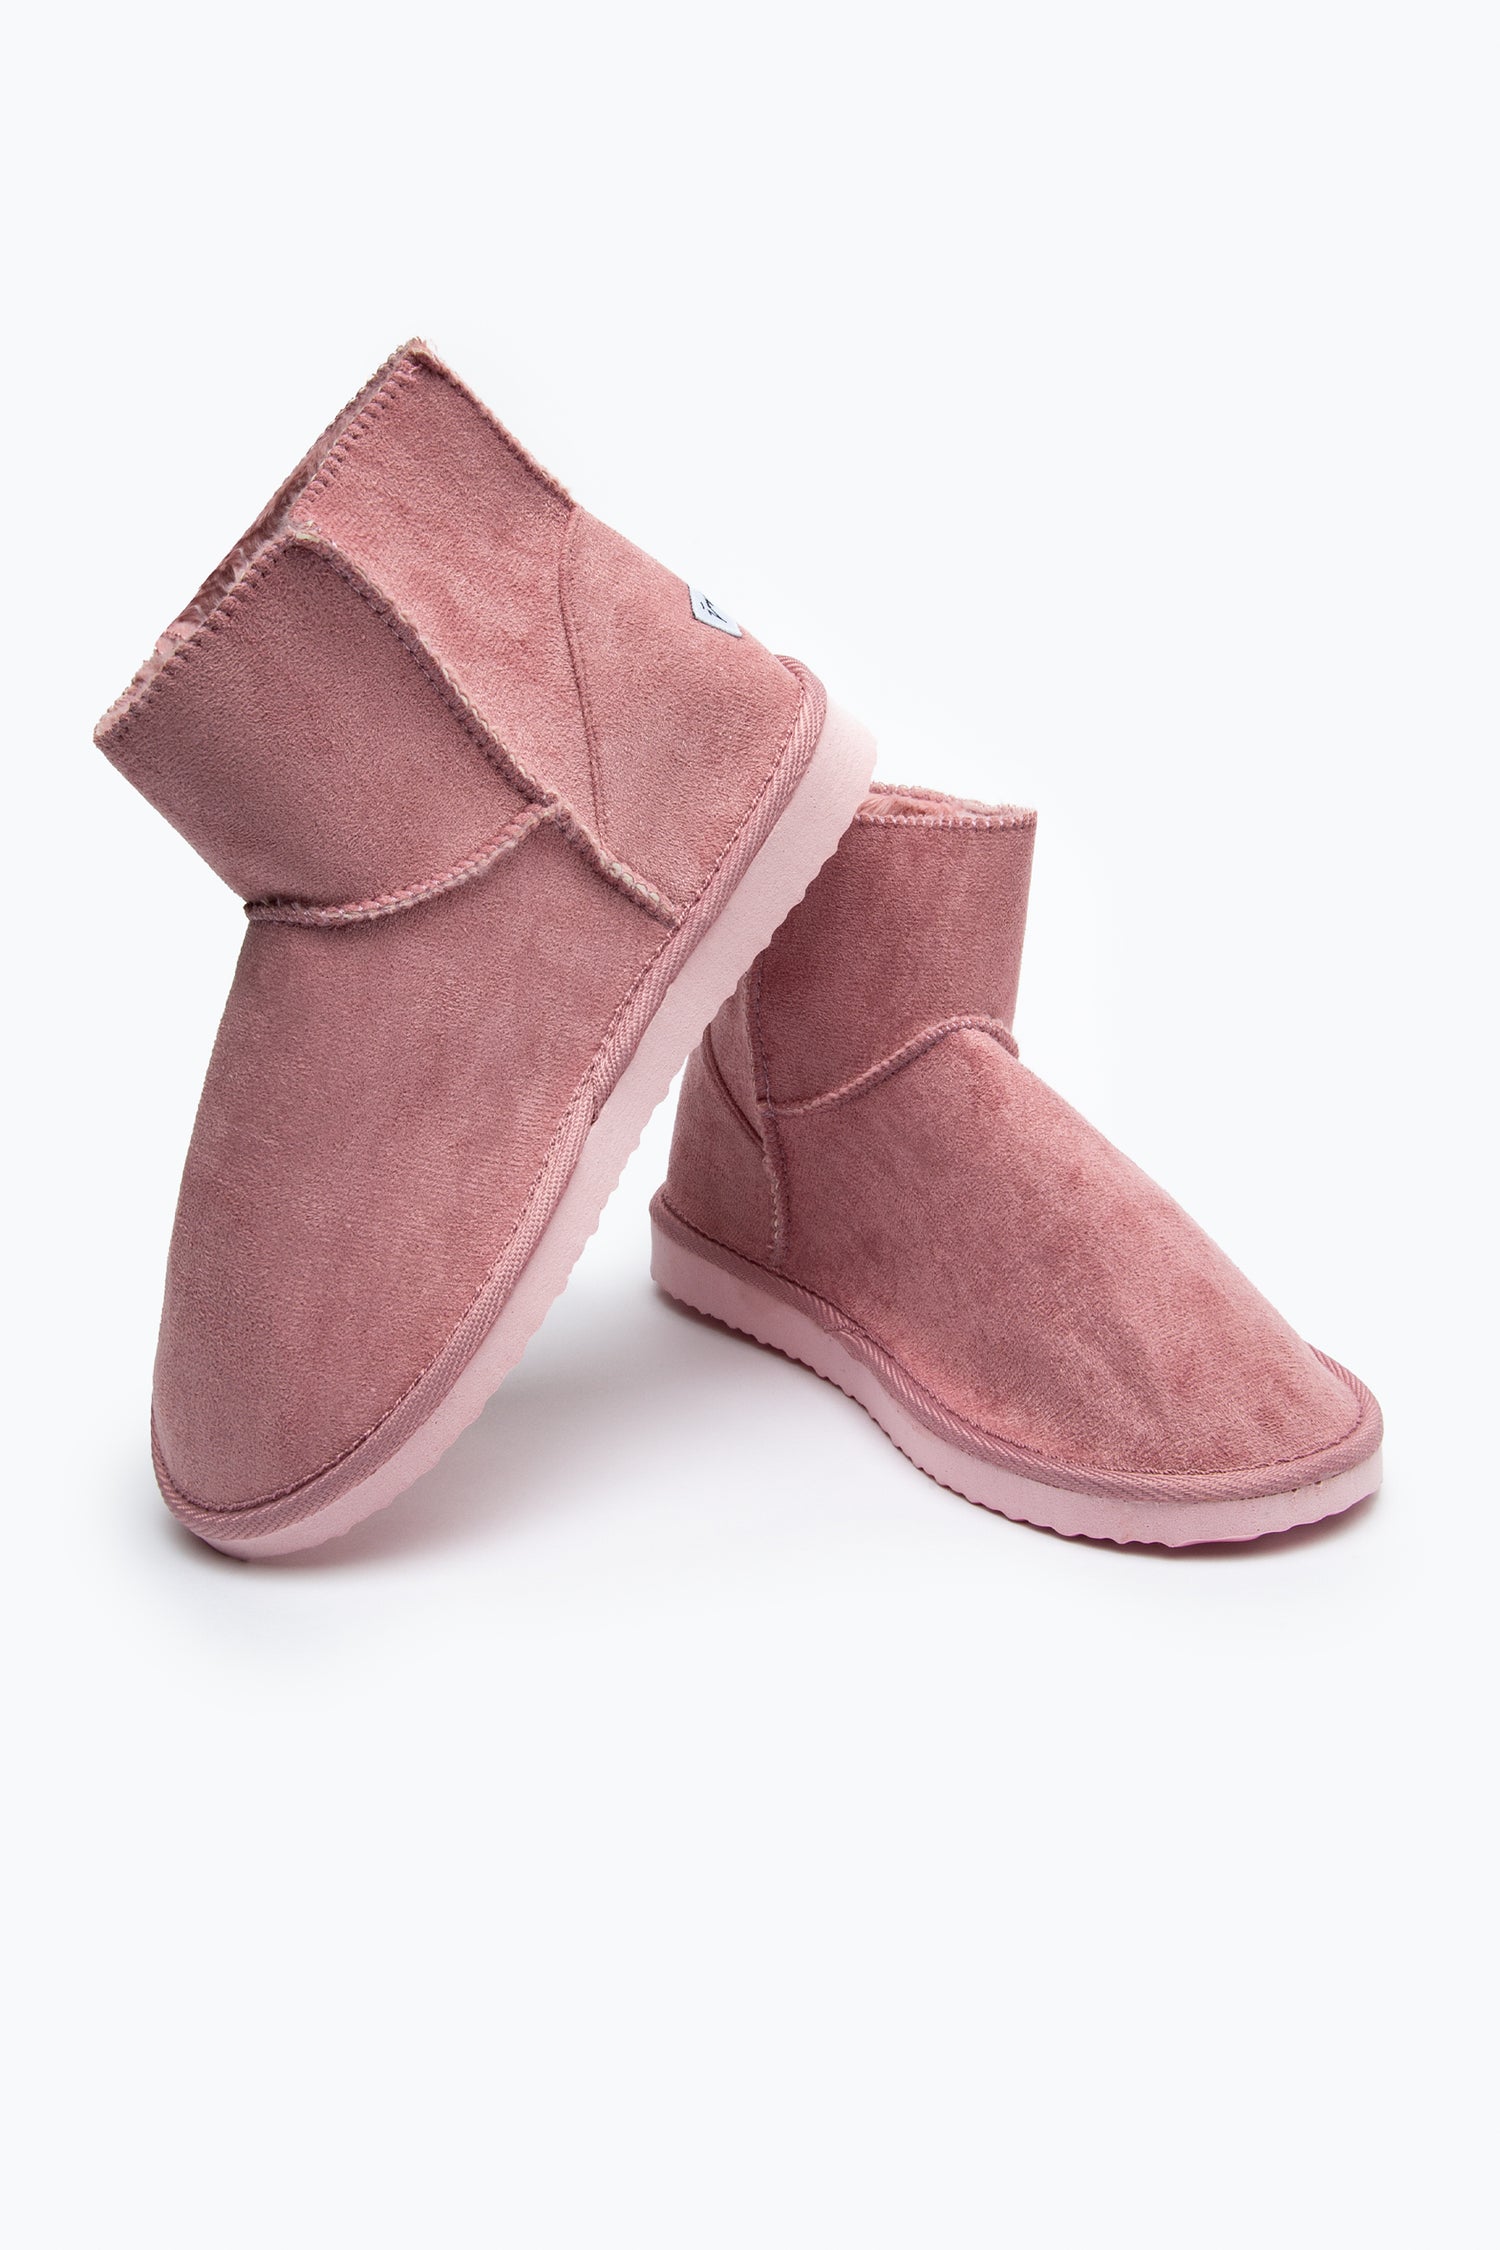 HYPE PINK WOMENS SLIPPERS BOOT